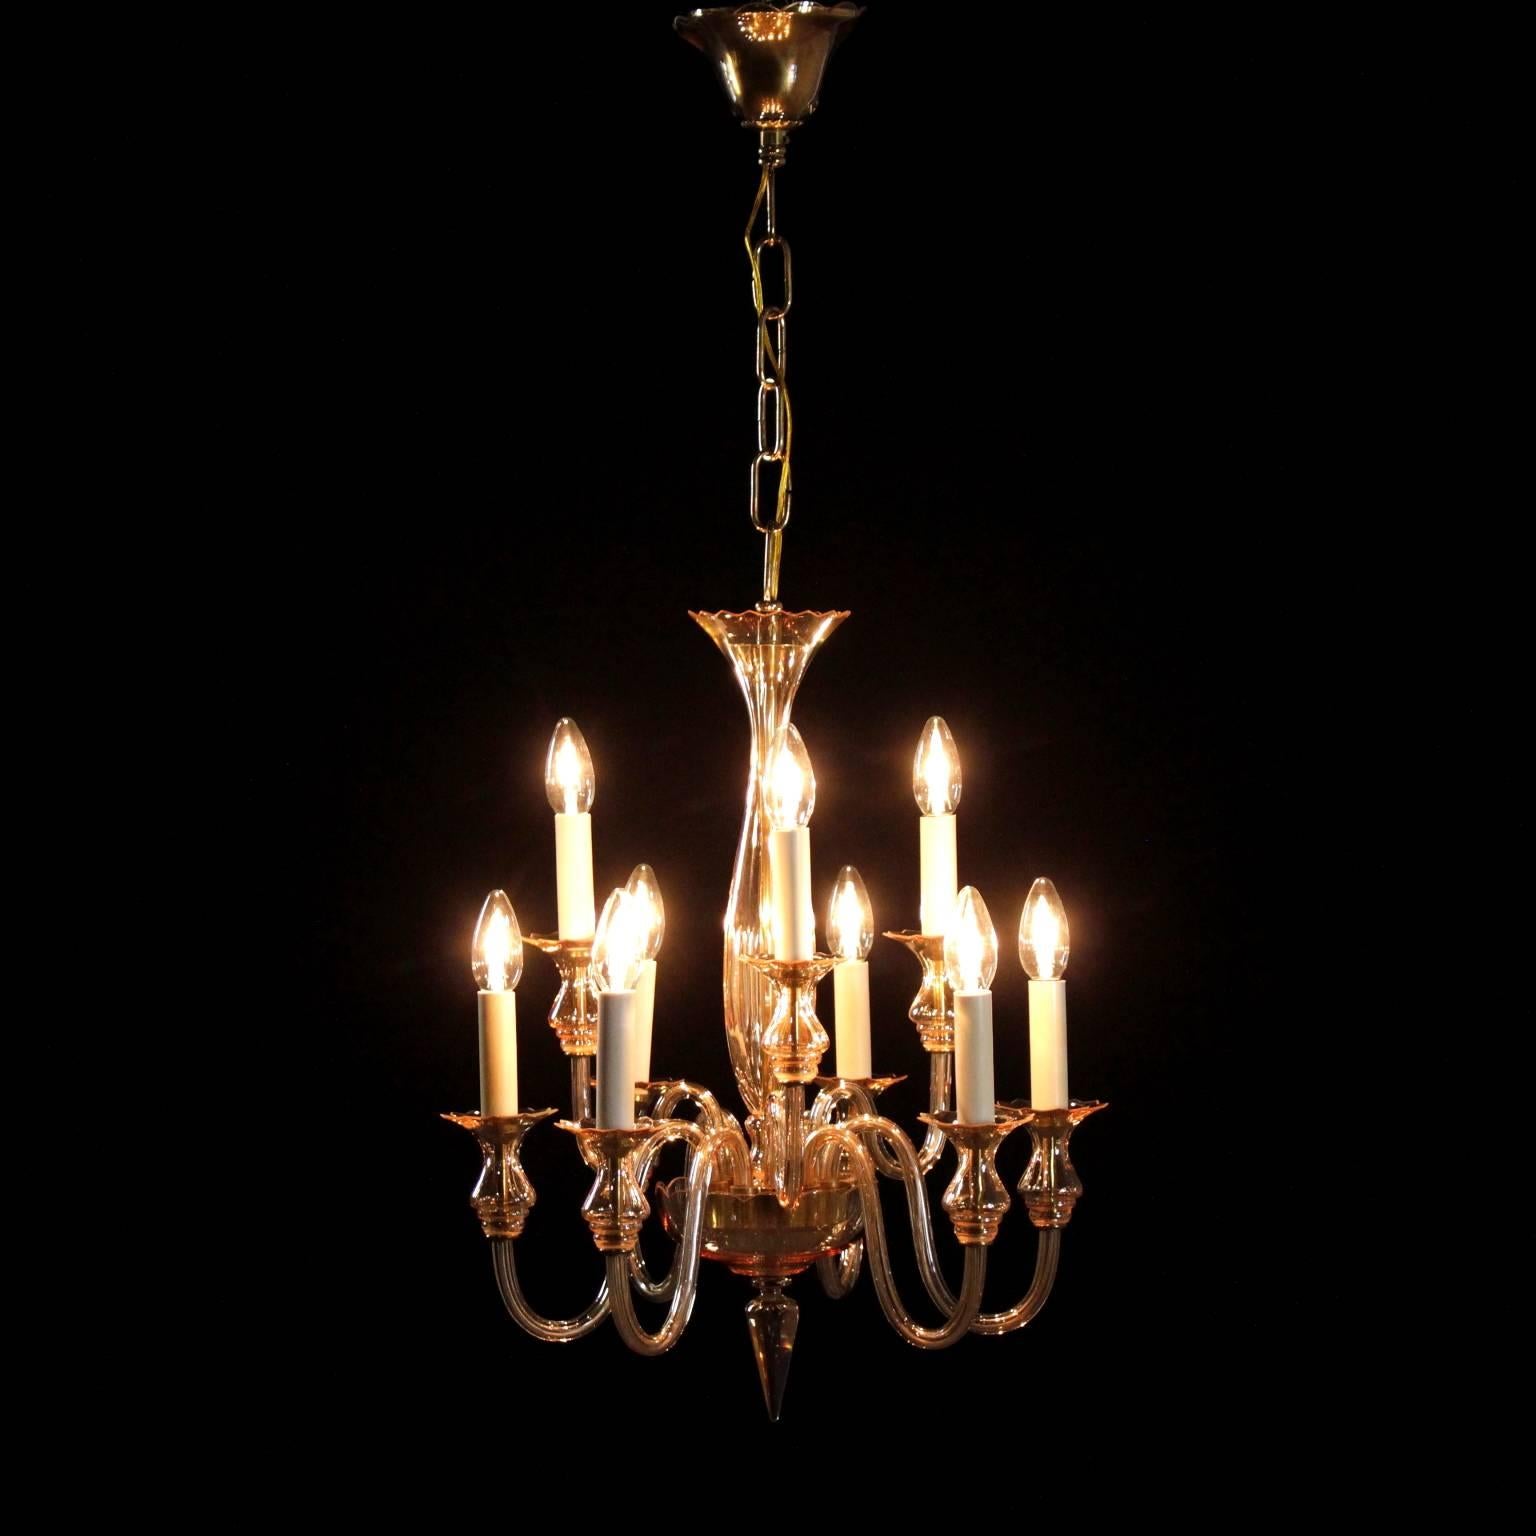 A blown glass hanging lamp, manufactured in Italy, 1940s-1950s.